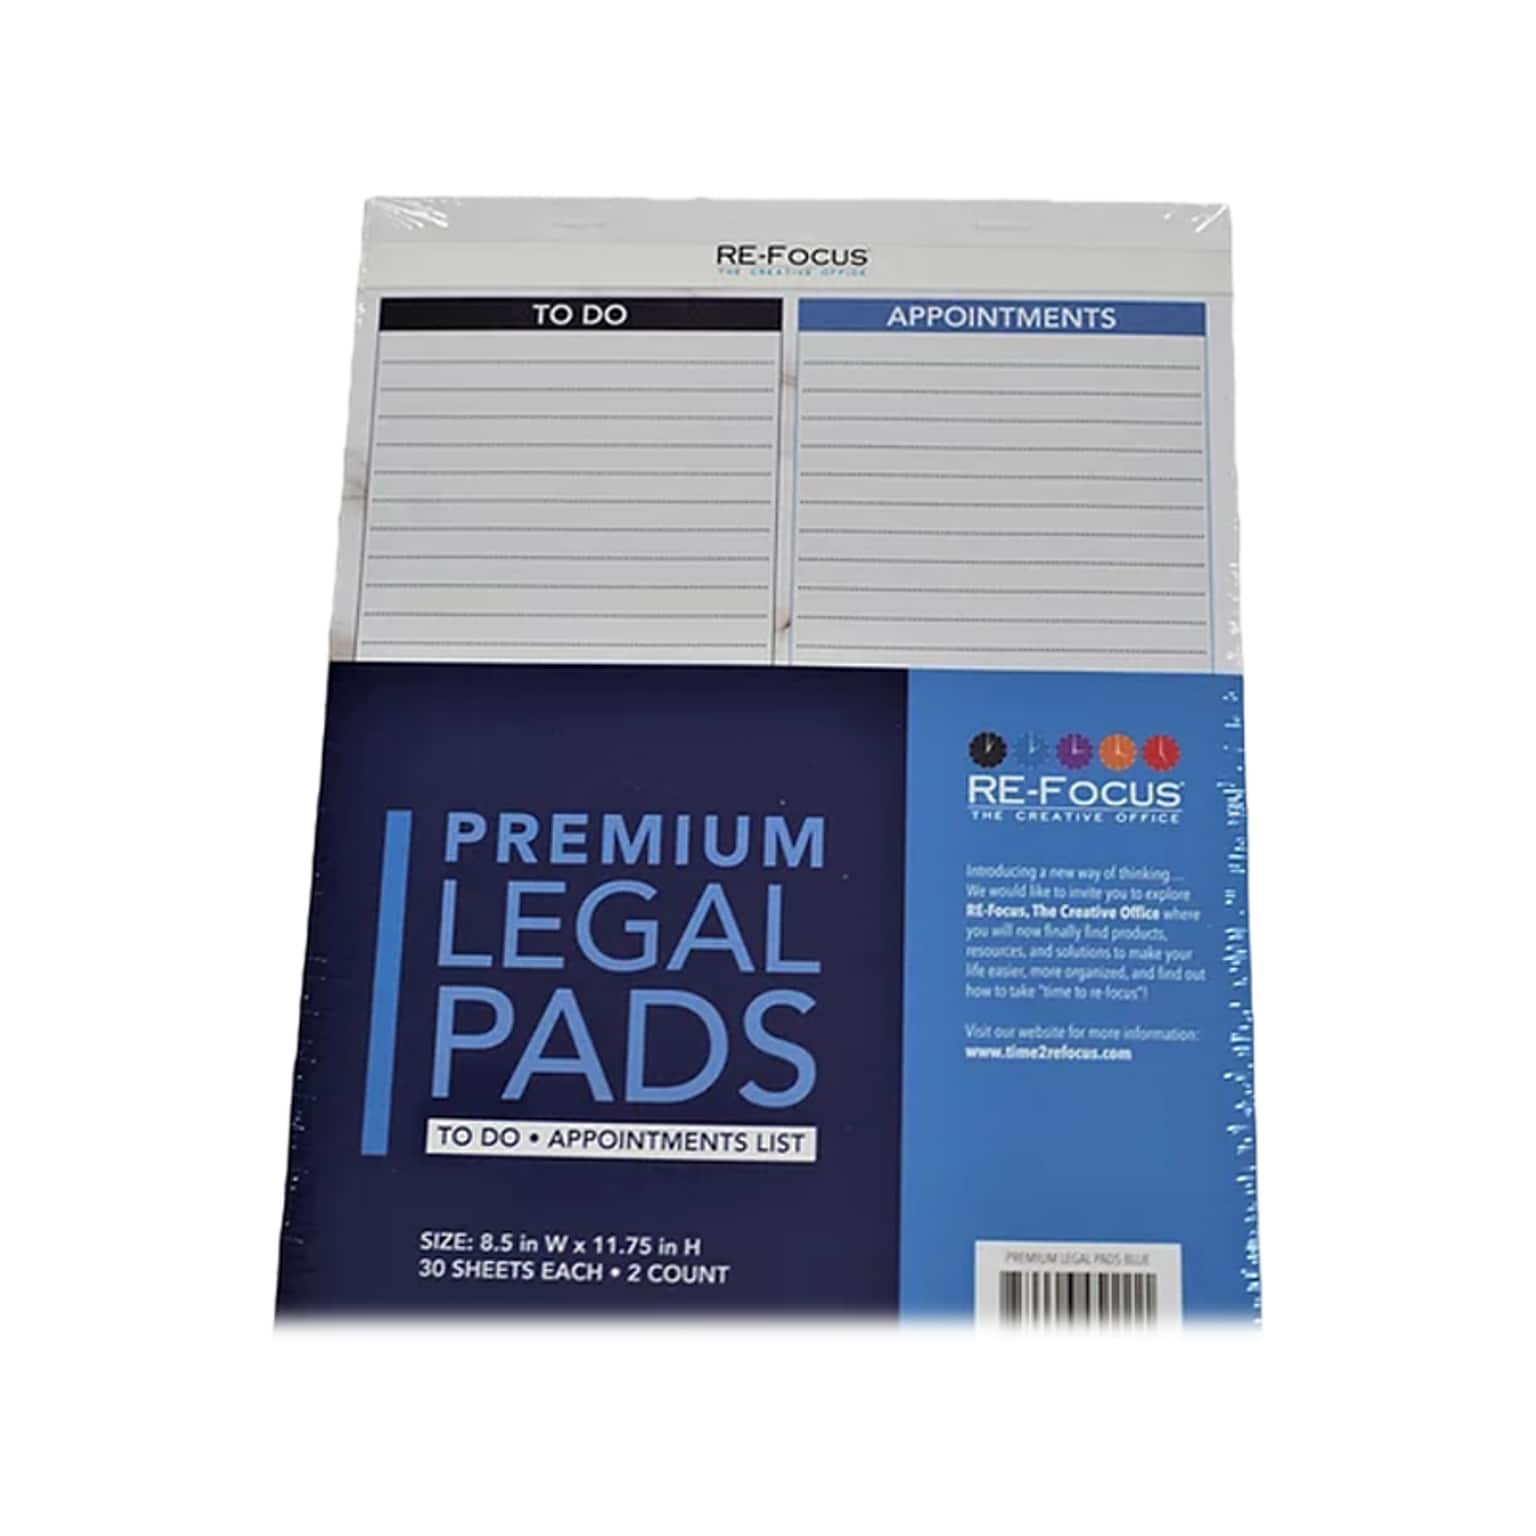 RE-FOCUS THE CREATIVE OFFICE Premium Legal Pad, Ruled, 8.5 x 11.75, Blue, 30 Sheets/Pad, 2 Pads (40001)